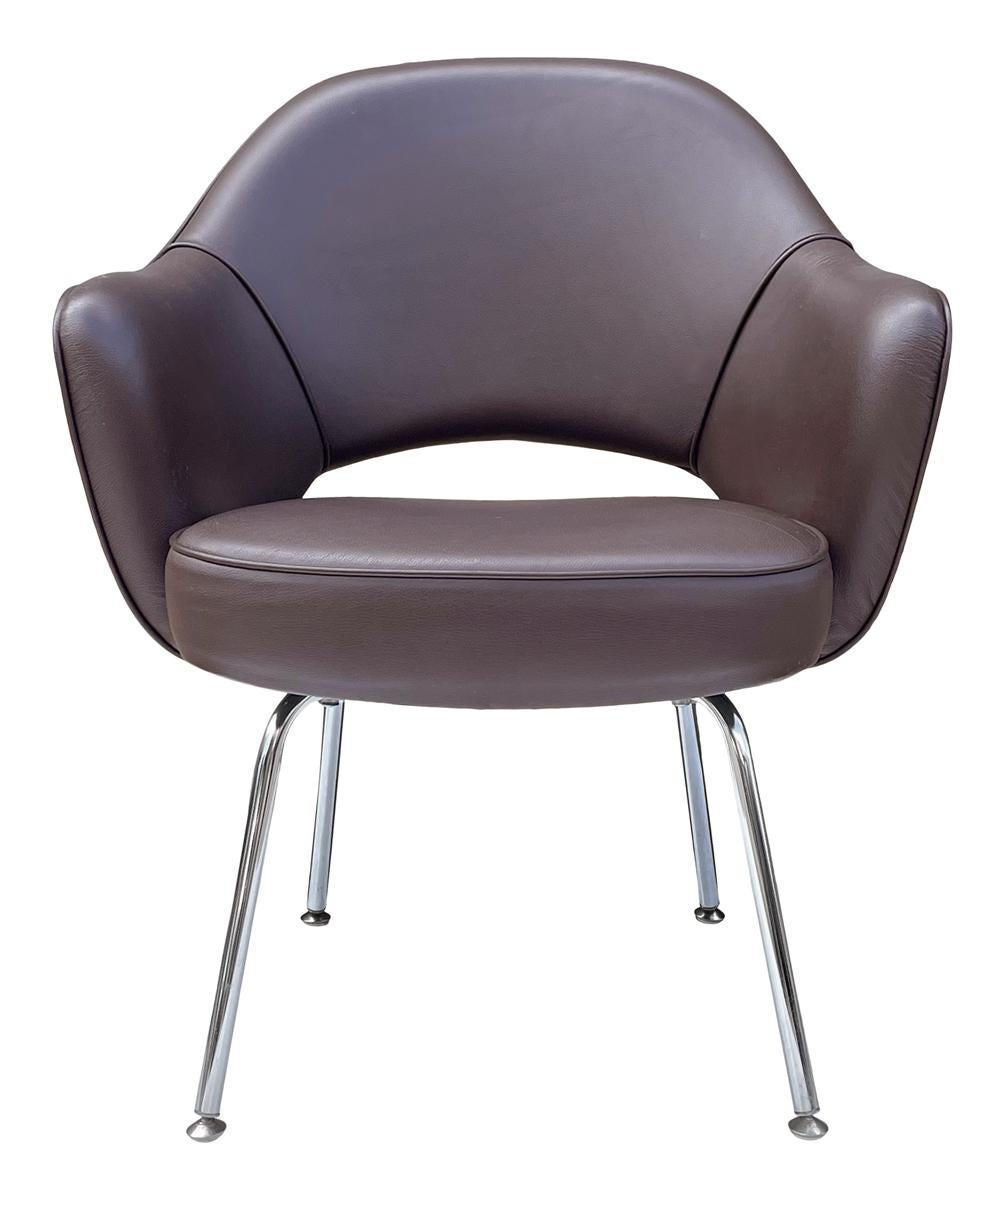 Late 20th Century Mid Century Modern Brown Leather Armchair Dining Chairs by Eero Sarrinen Knoll